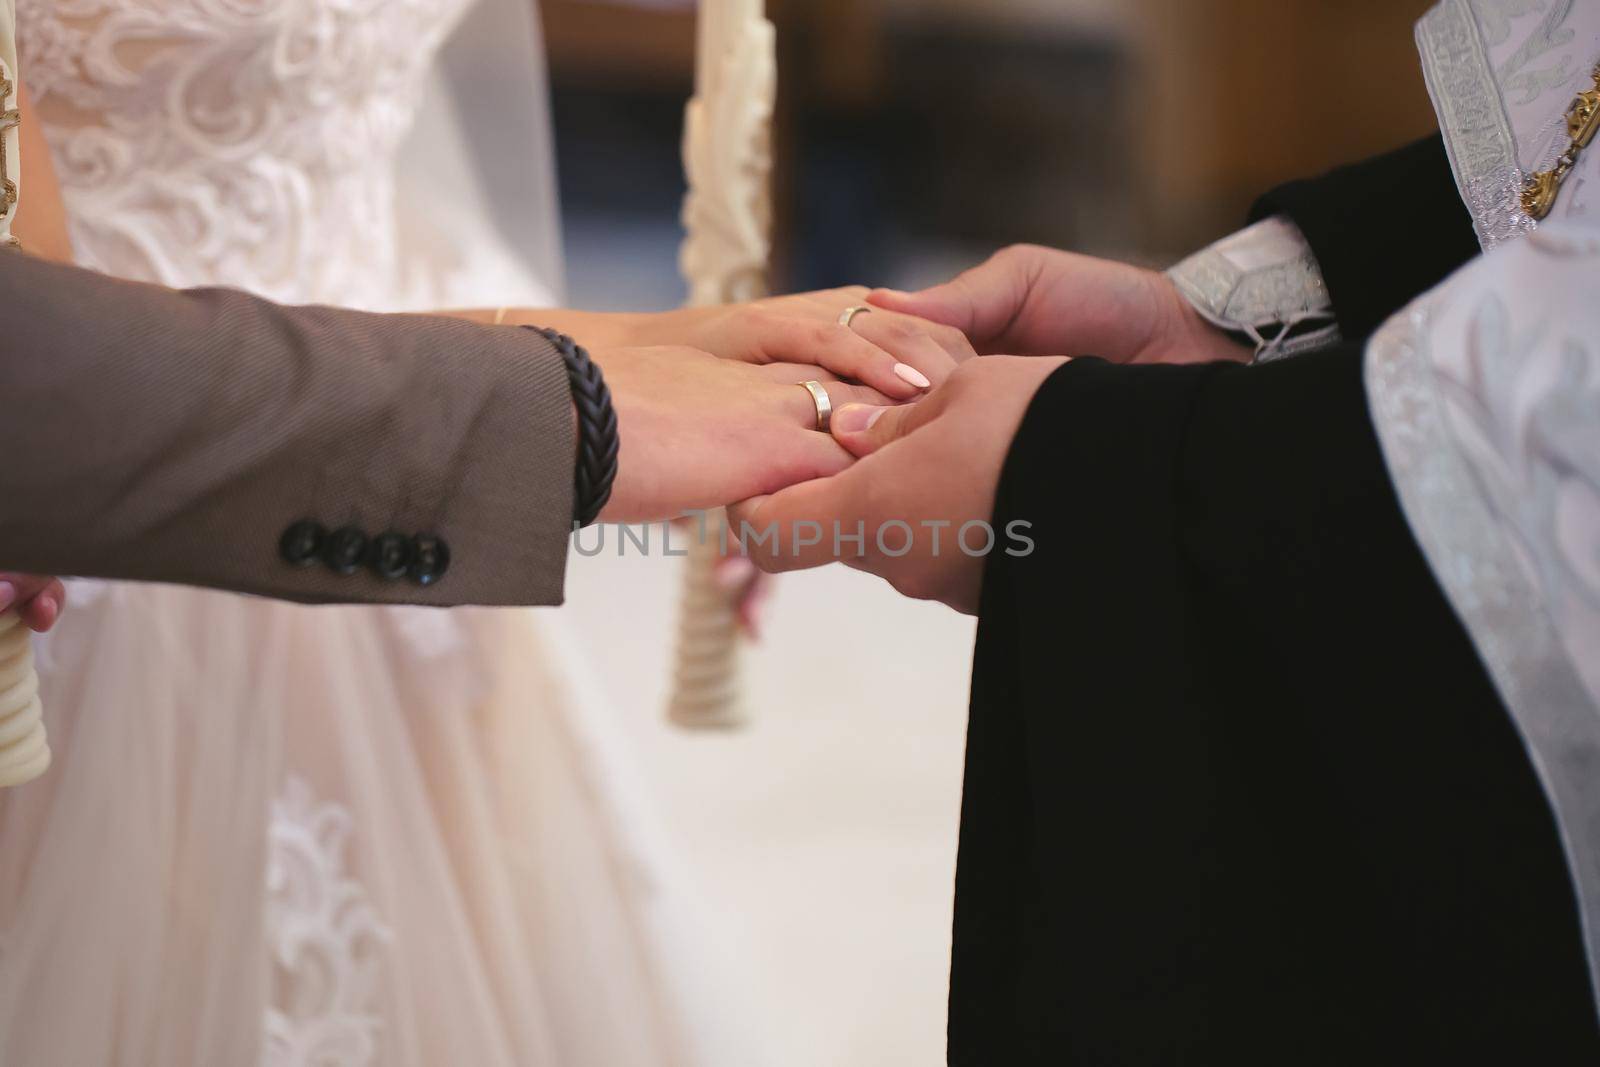 The priest consecrates the wedding rings on the fingers of the bride and groom. Wedding tradition and ritual. hands of a young couple in the church by StudioPeace